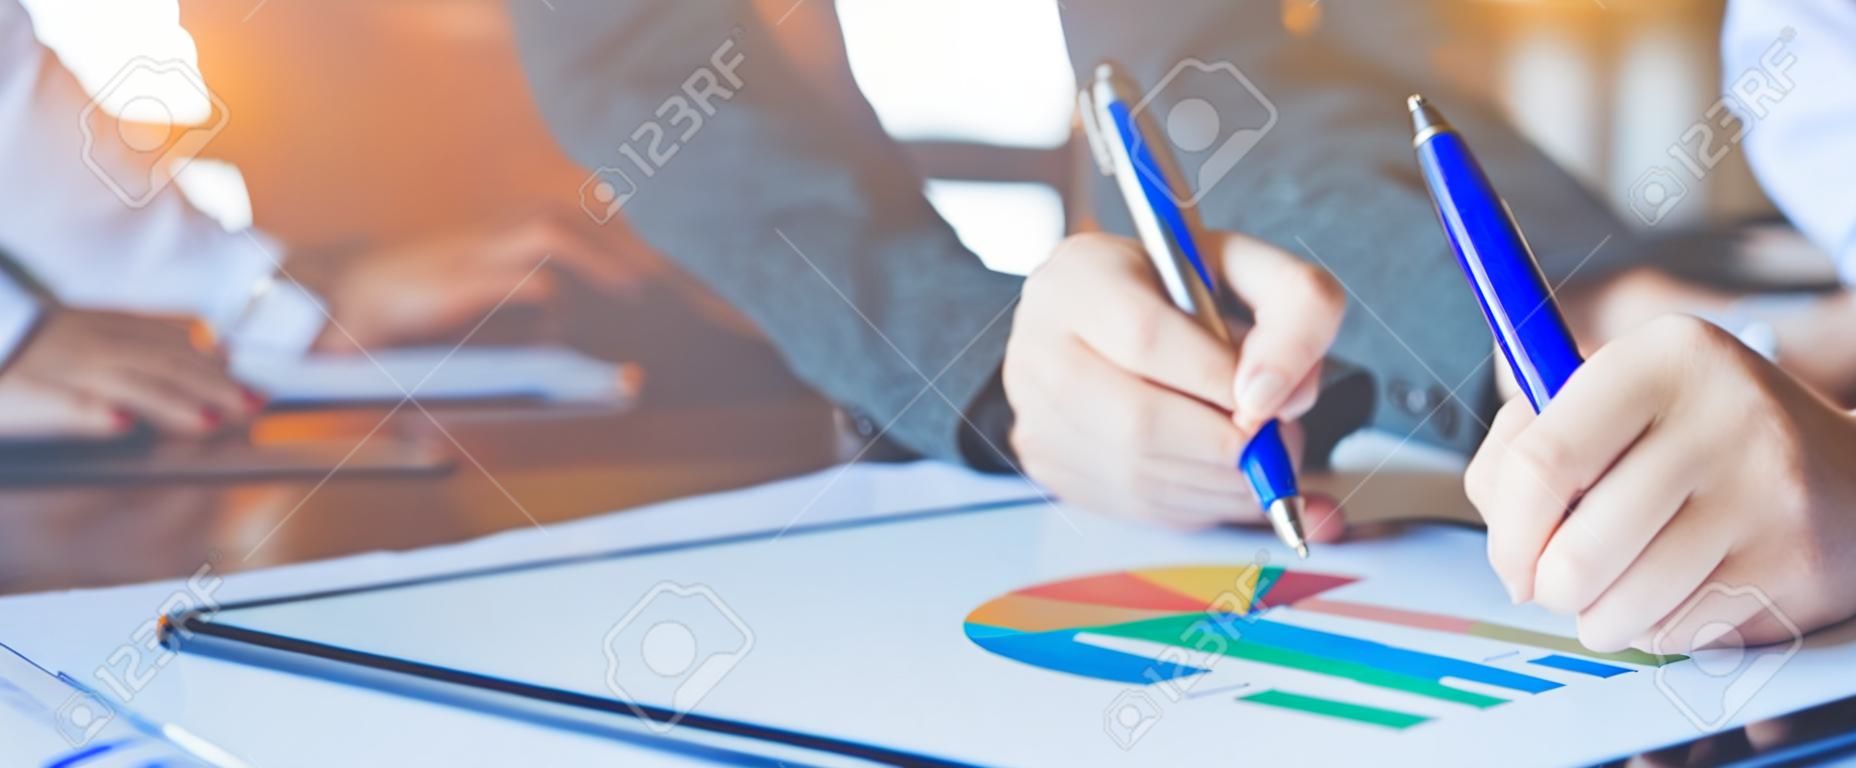 Business woman hand writing on charts and graphs that show results.Web banner.